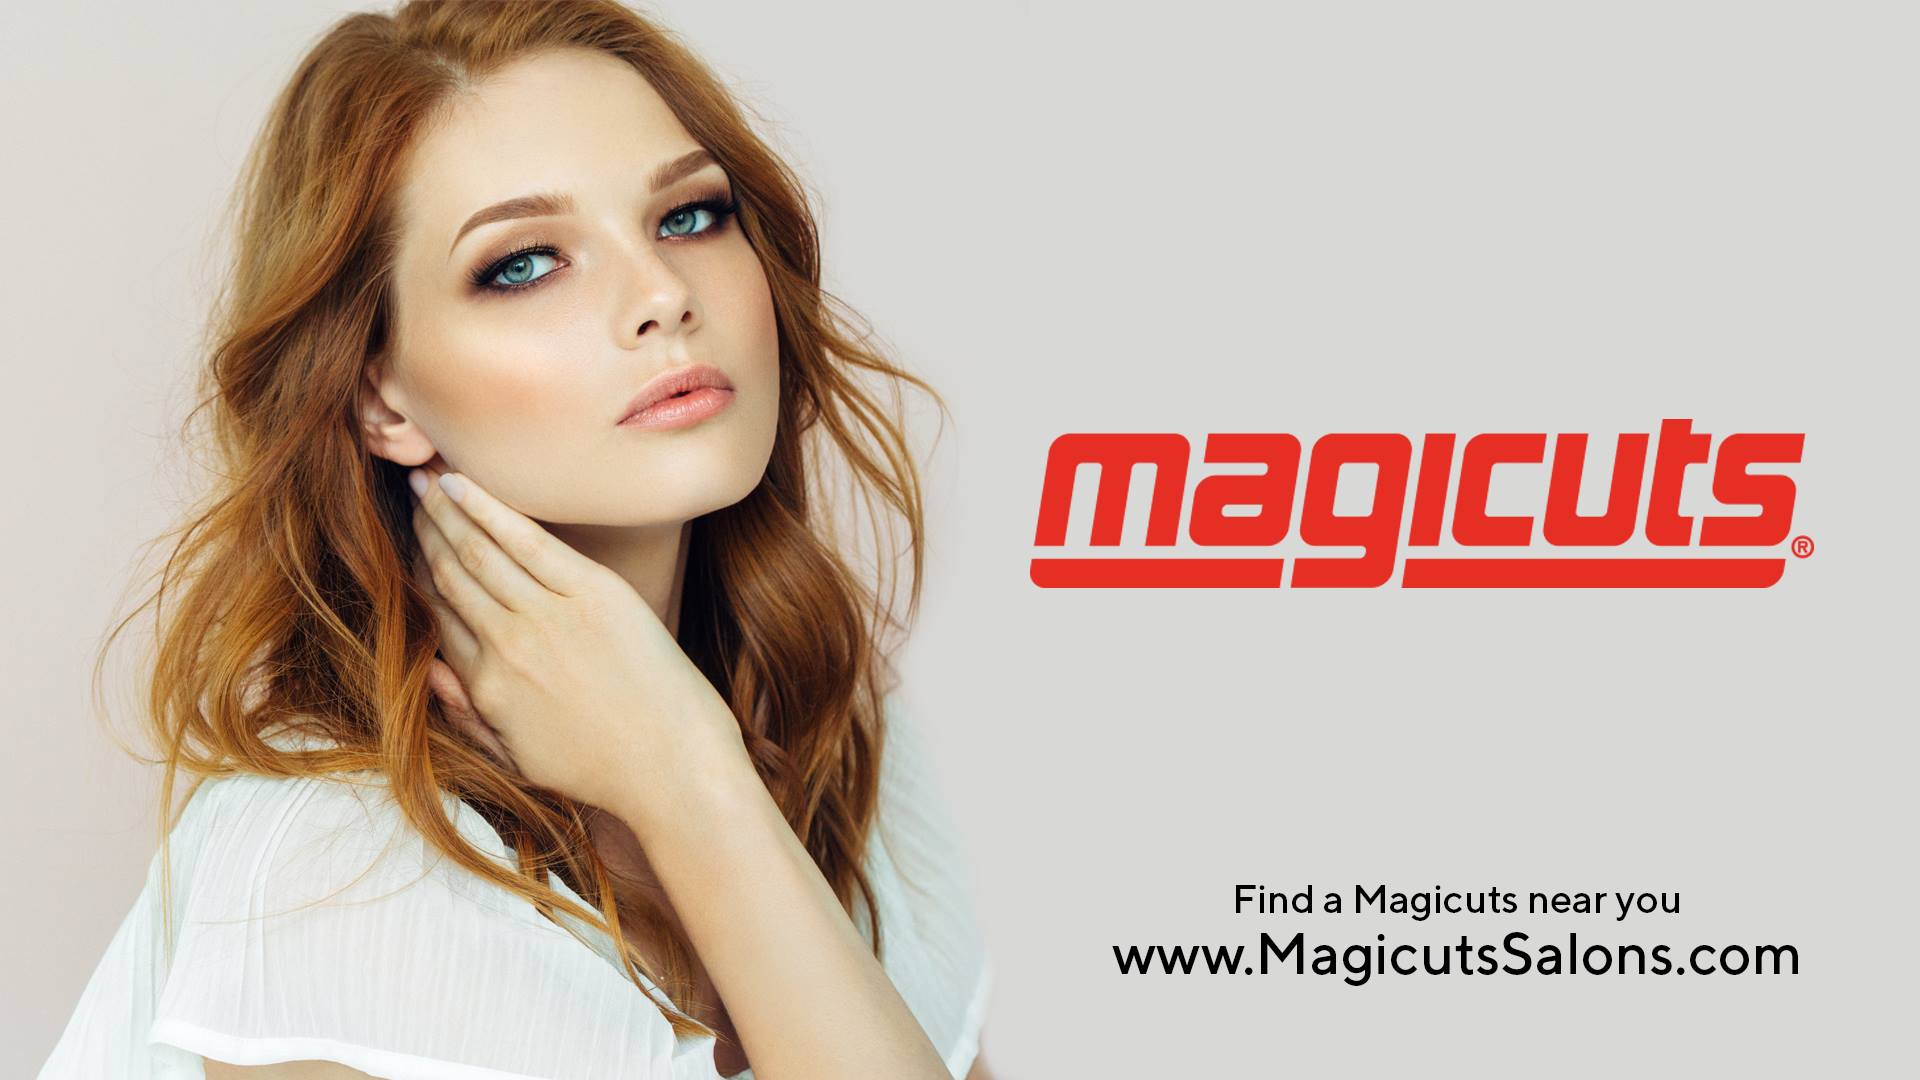 Magicuts 160 Old Placentia Rd, Mount Pearl Newfoundland and Labrador A1N 4Y9